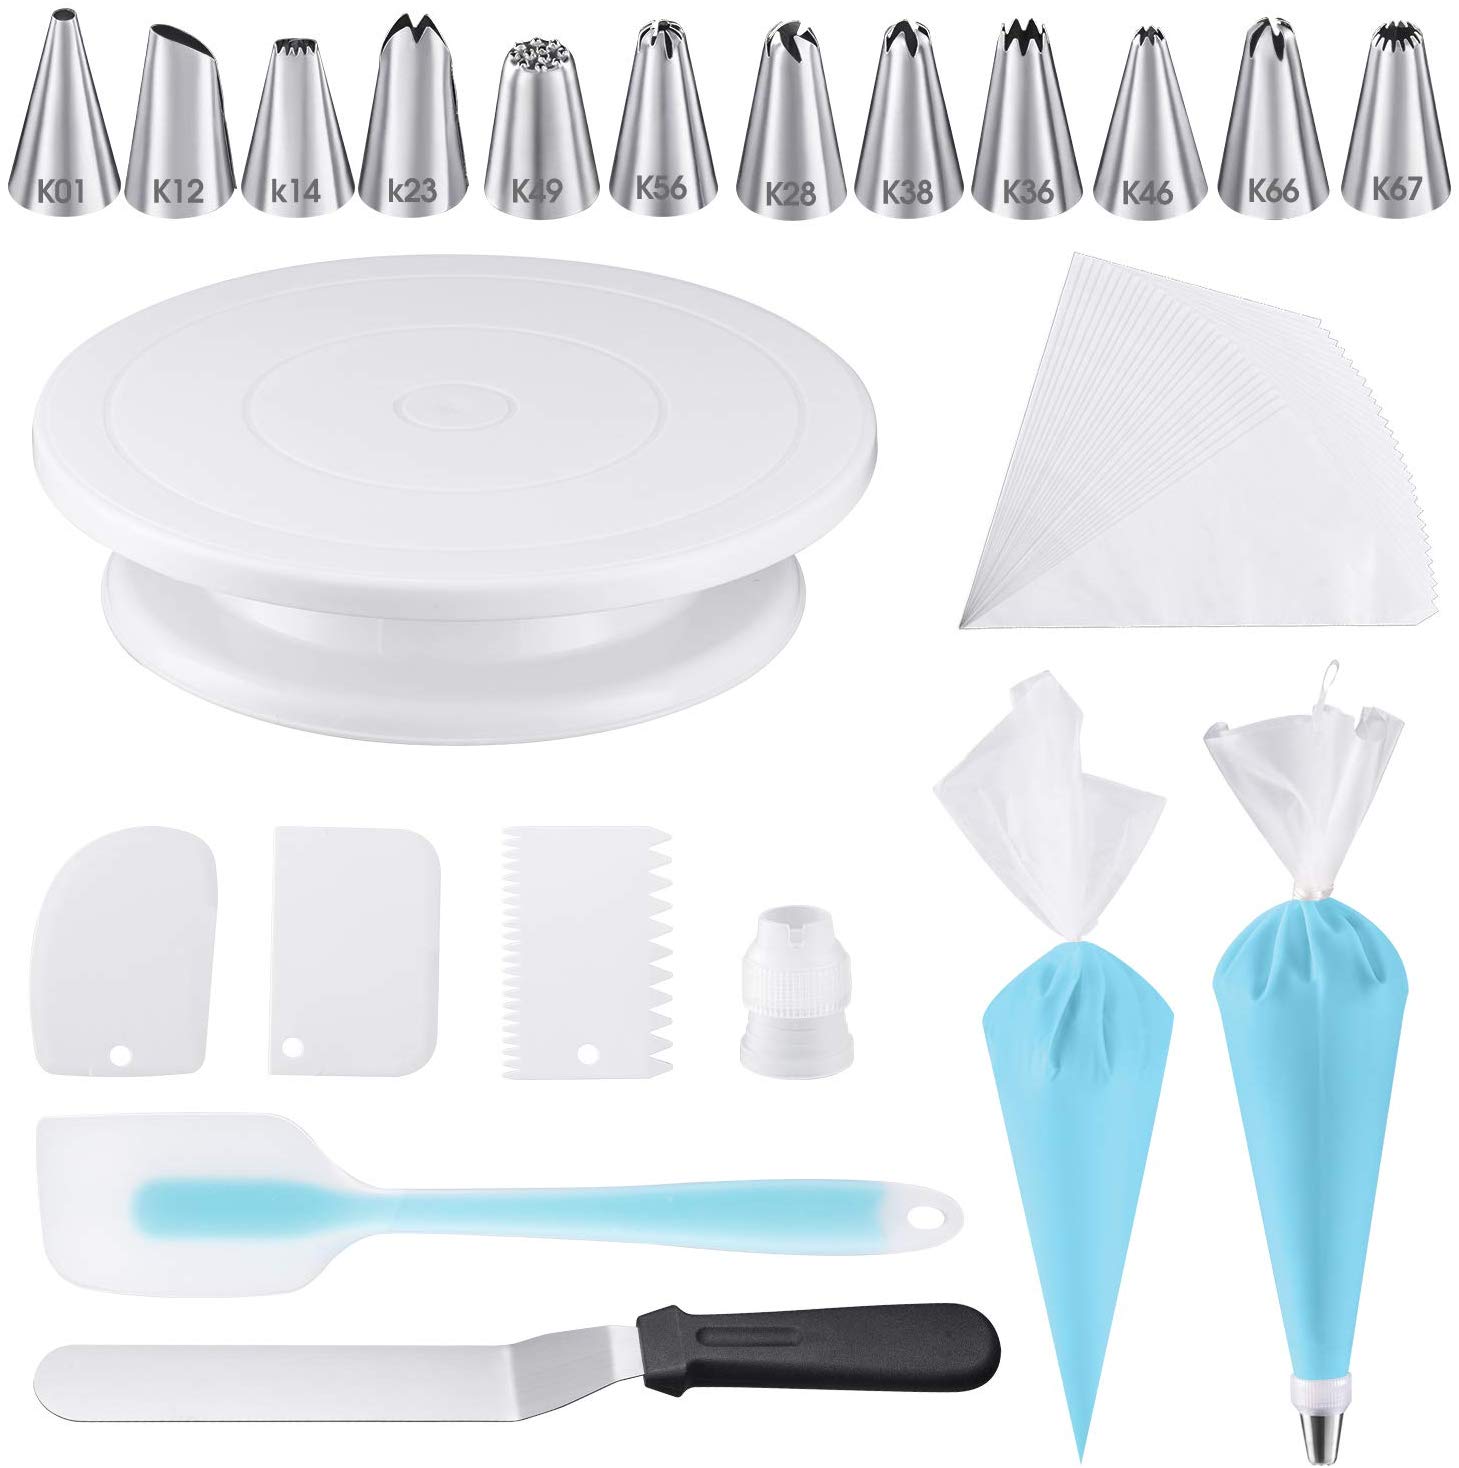 KD007 11 Inch Cake Decorating Supplies